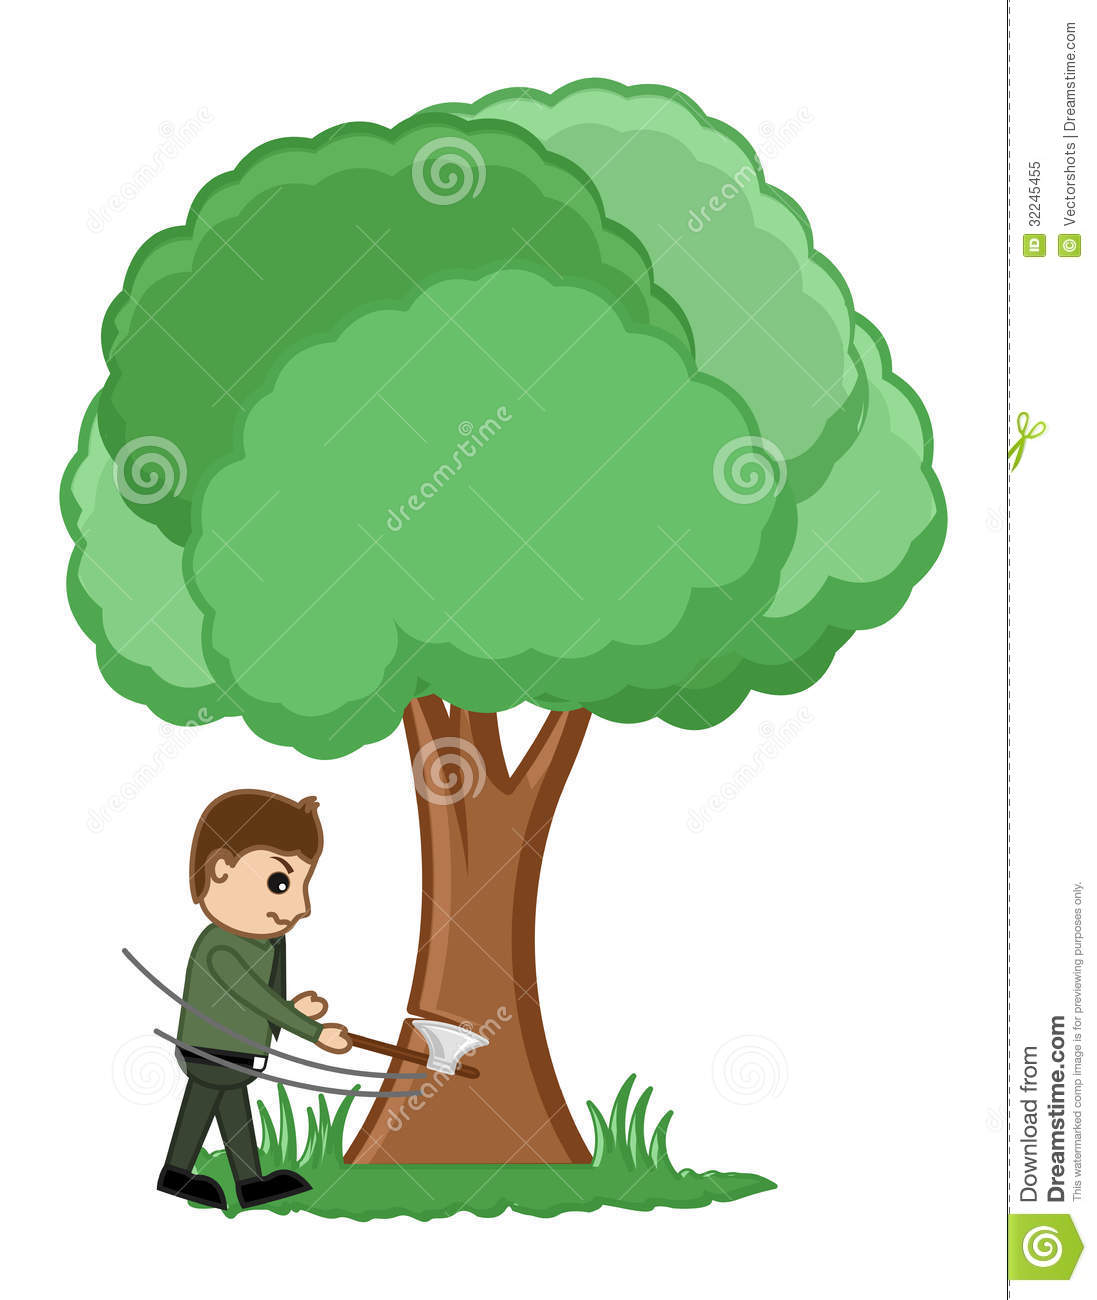 There Is 52 Someone Cutting Down A Tree Free Cliparts All Used For